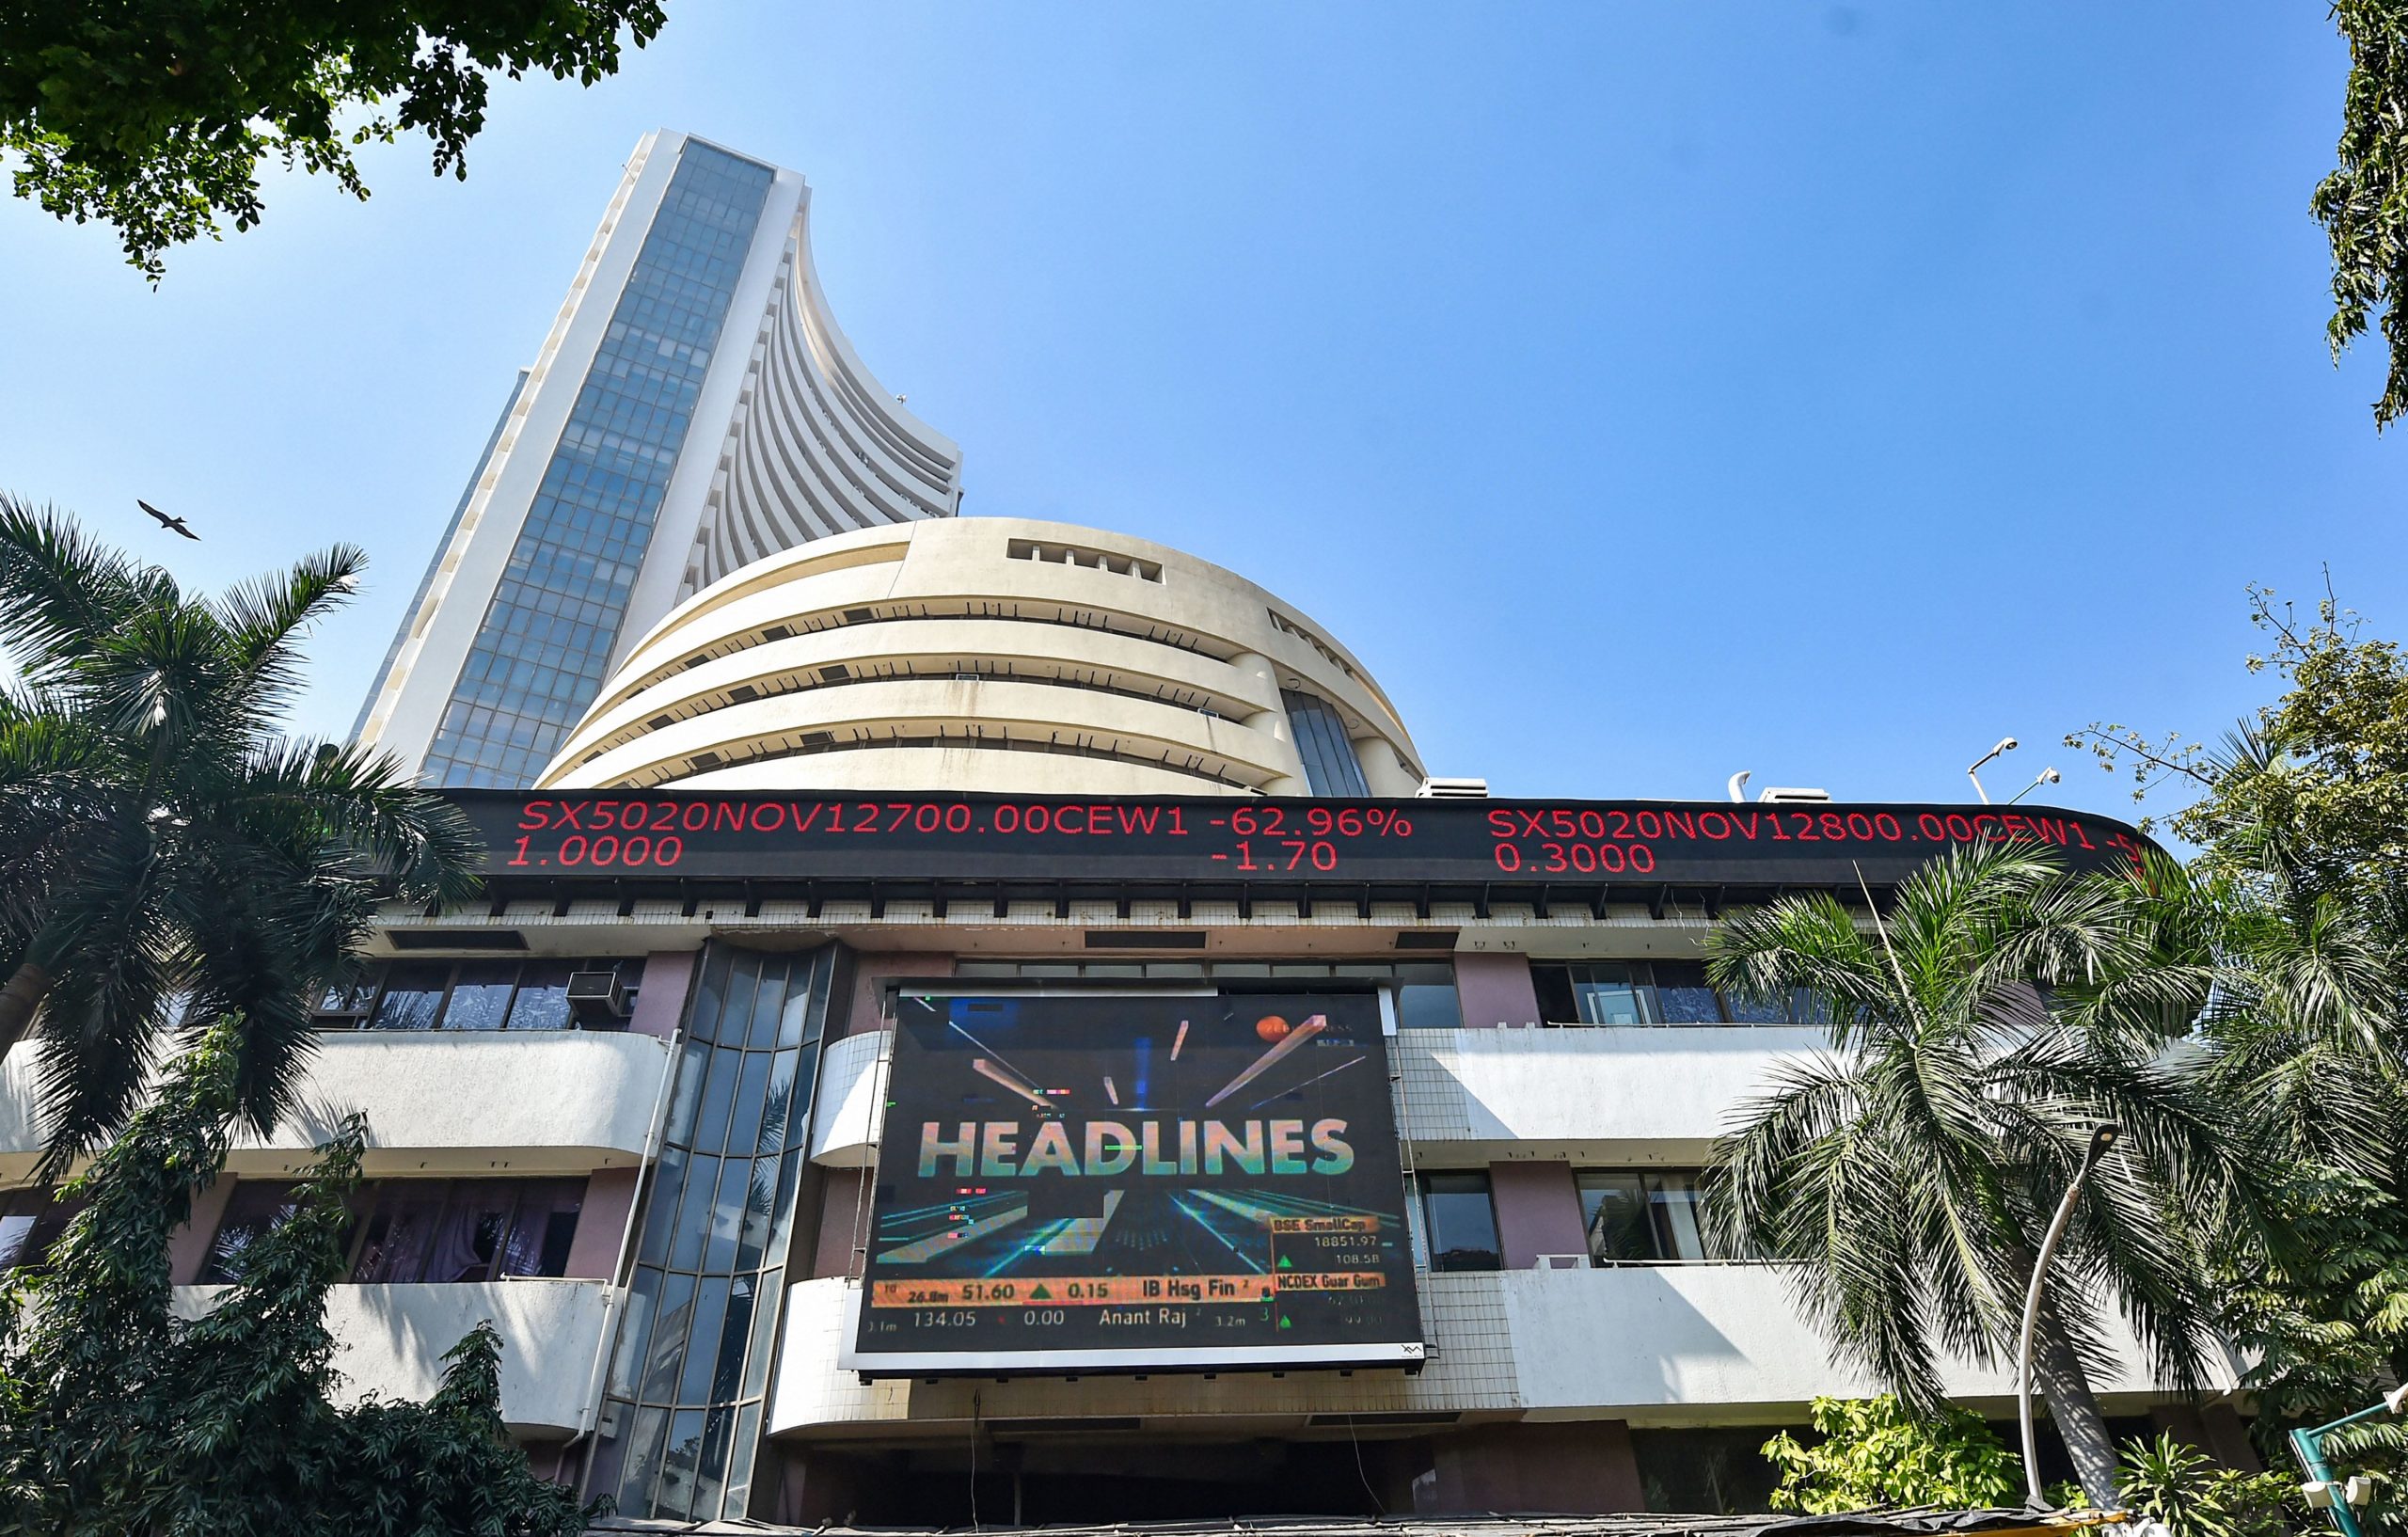 Trending Stocks: TVS Motor, Lupin, NHPC, Wipro and others in news today